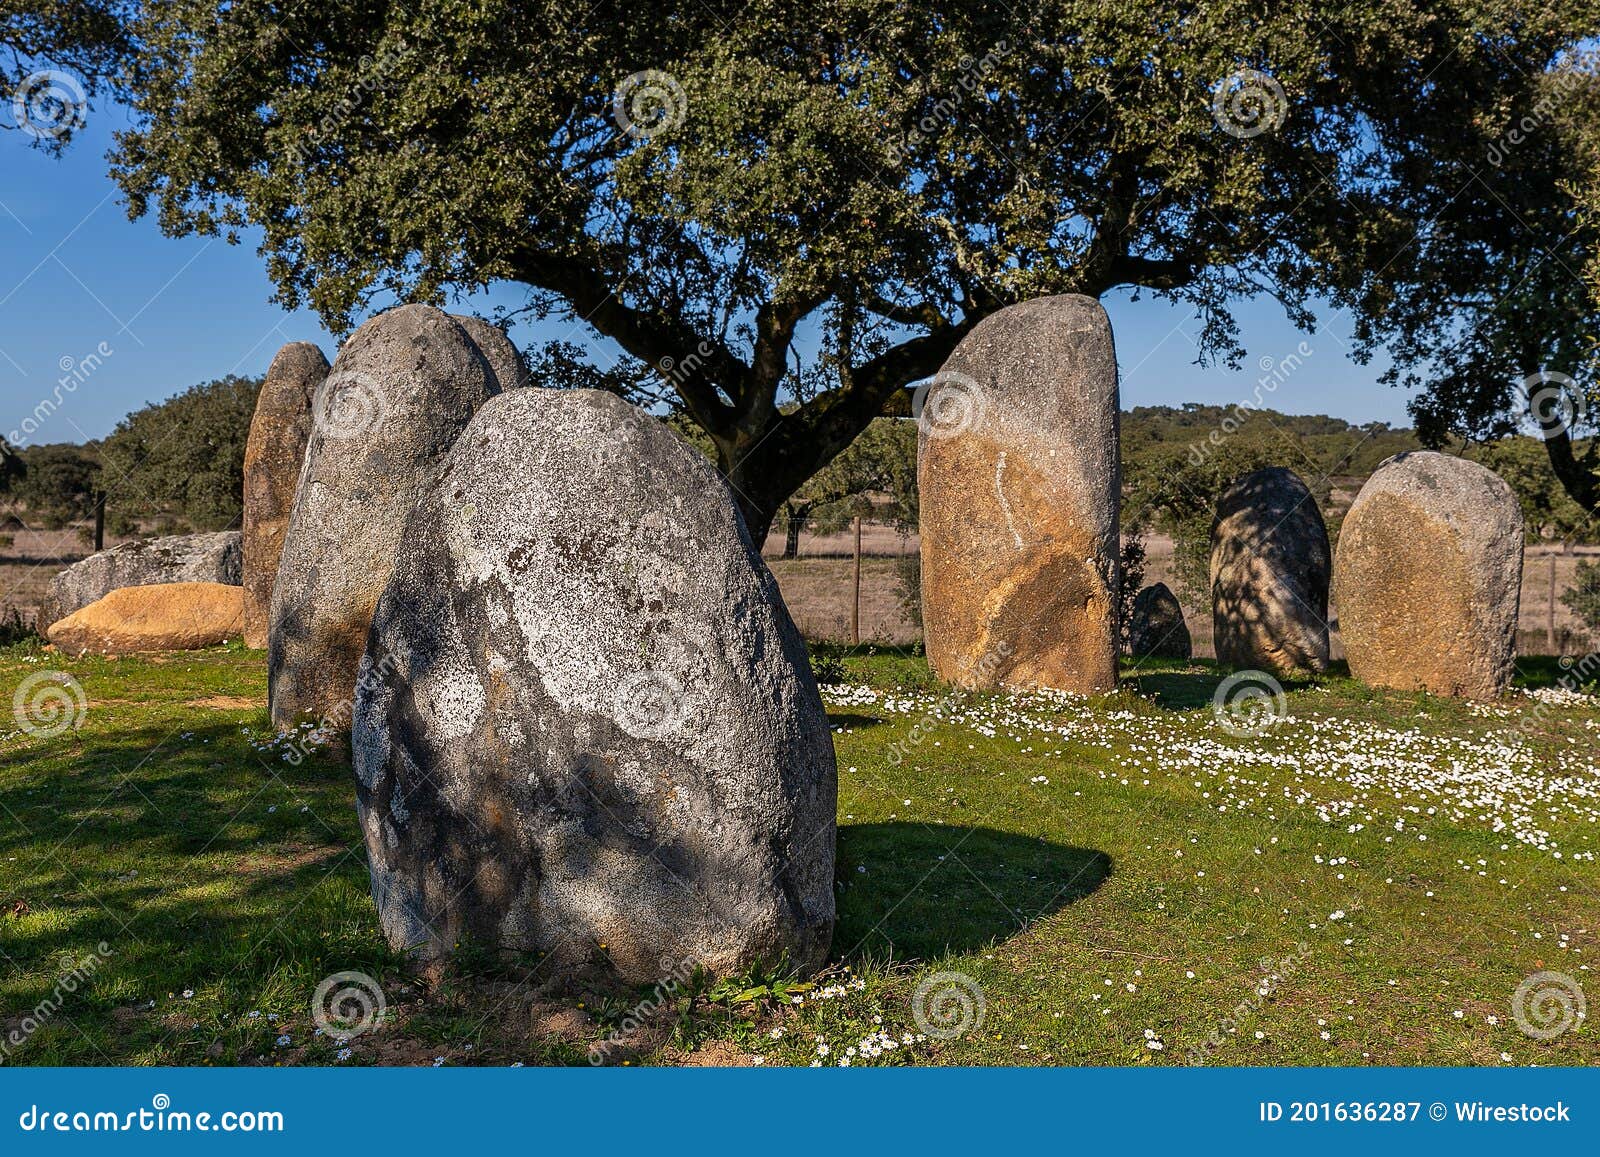 landscape of megalithic stone circle in vale maria do meio cromlech